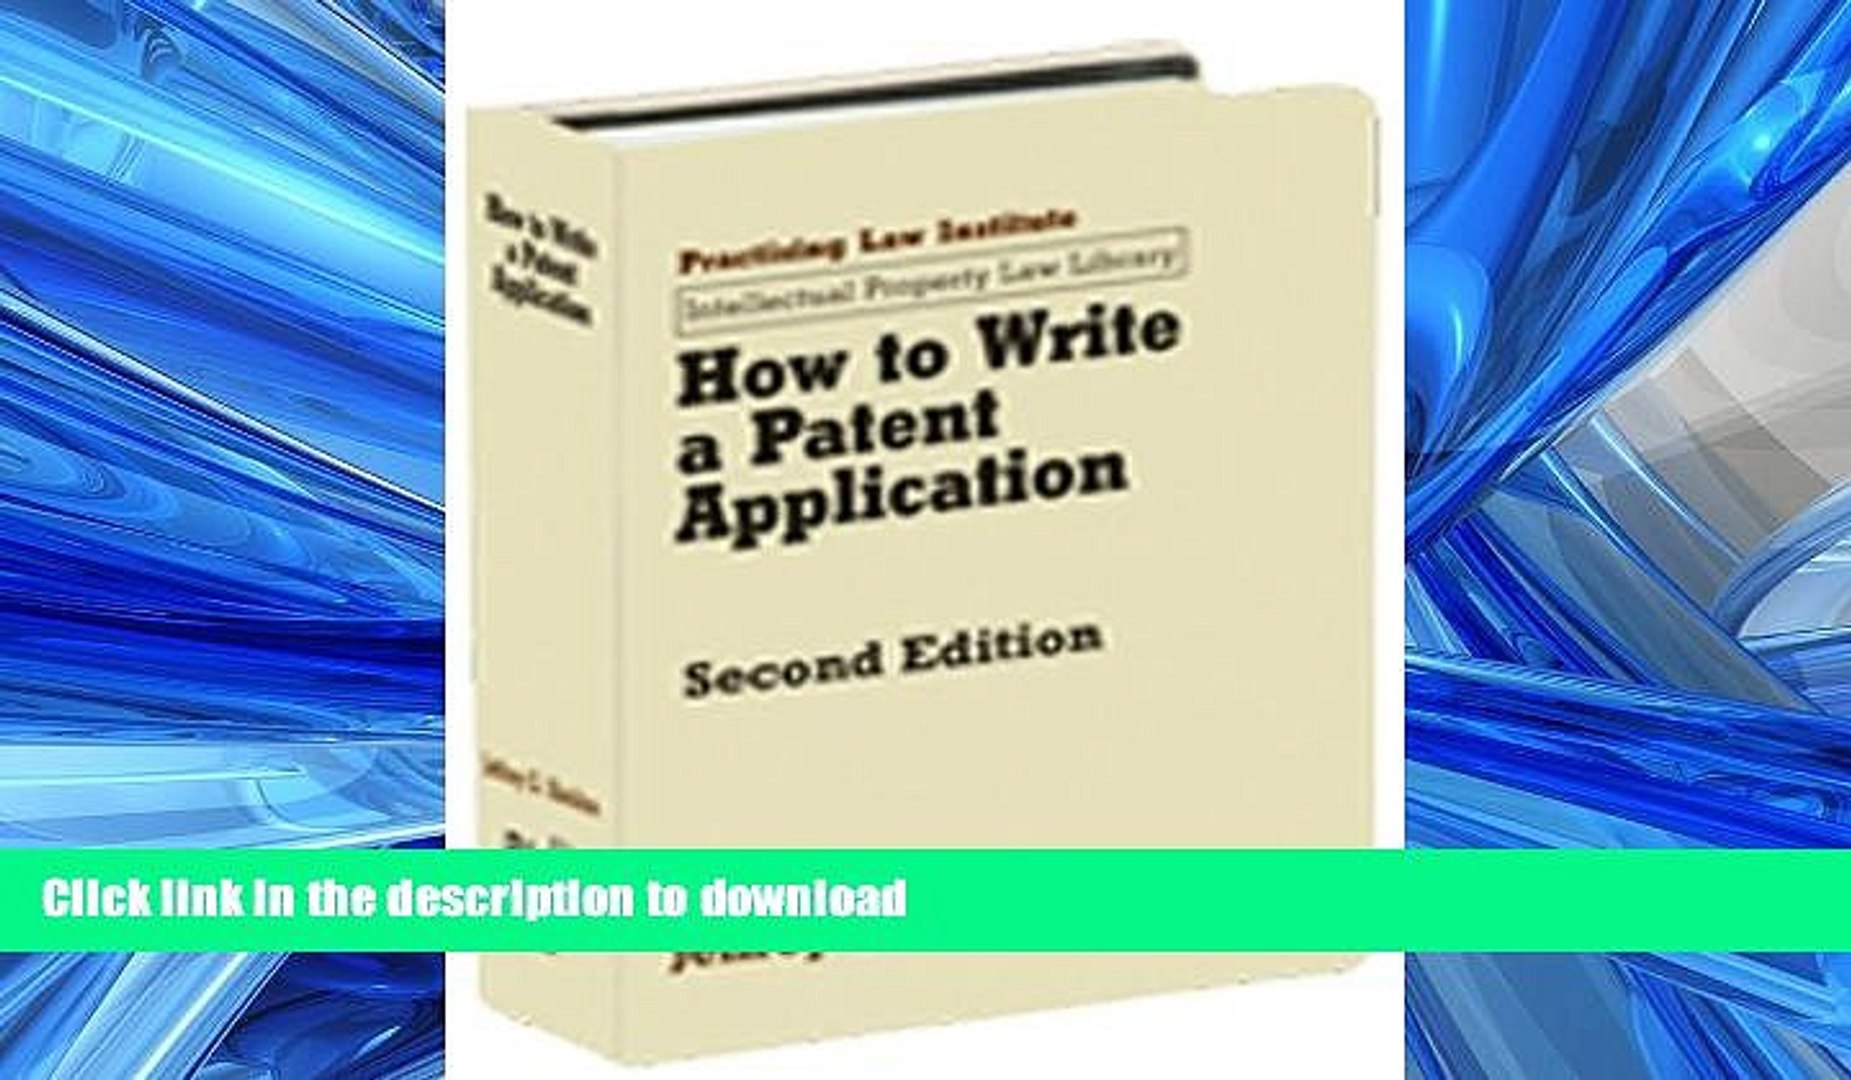 READ THE NEW BOOK How to Write a Patent Application (Intellectual Property  Law Library (Practising